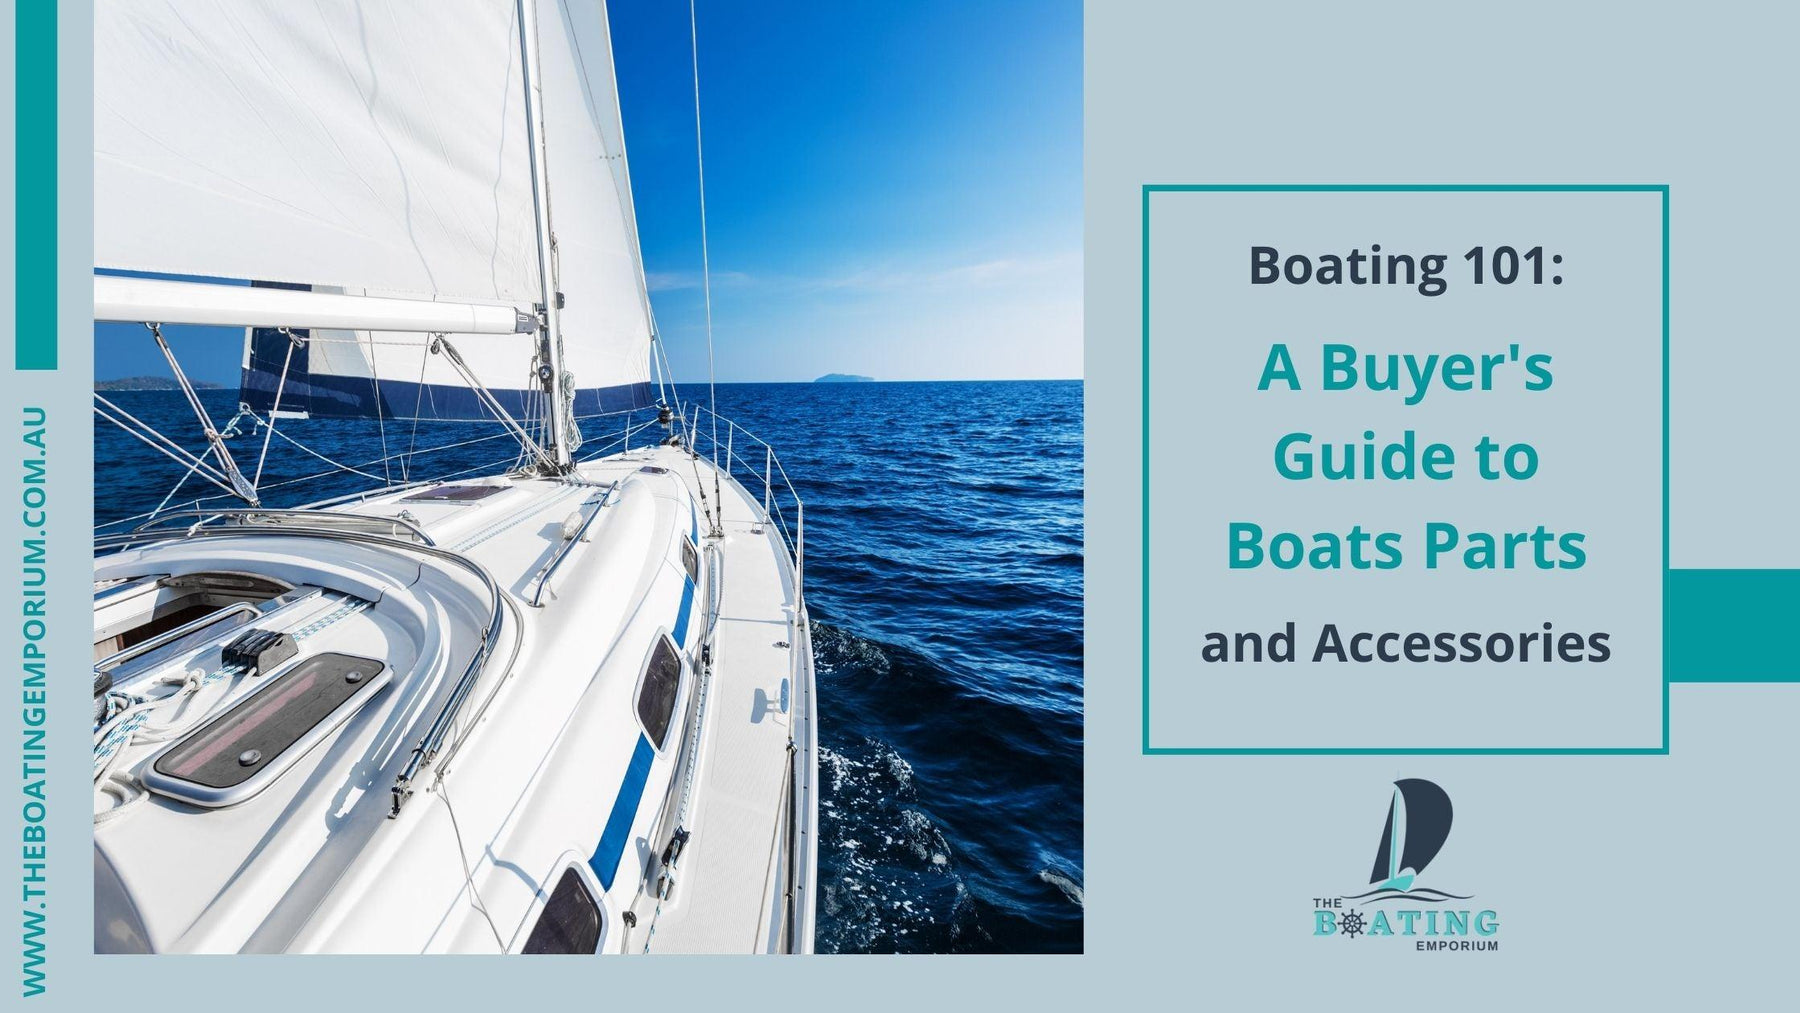 Boating 101: A Buyer’s Guide to Boat Parts and Accessories - The Boating Emporium